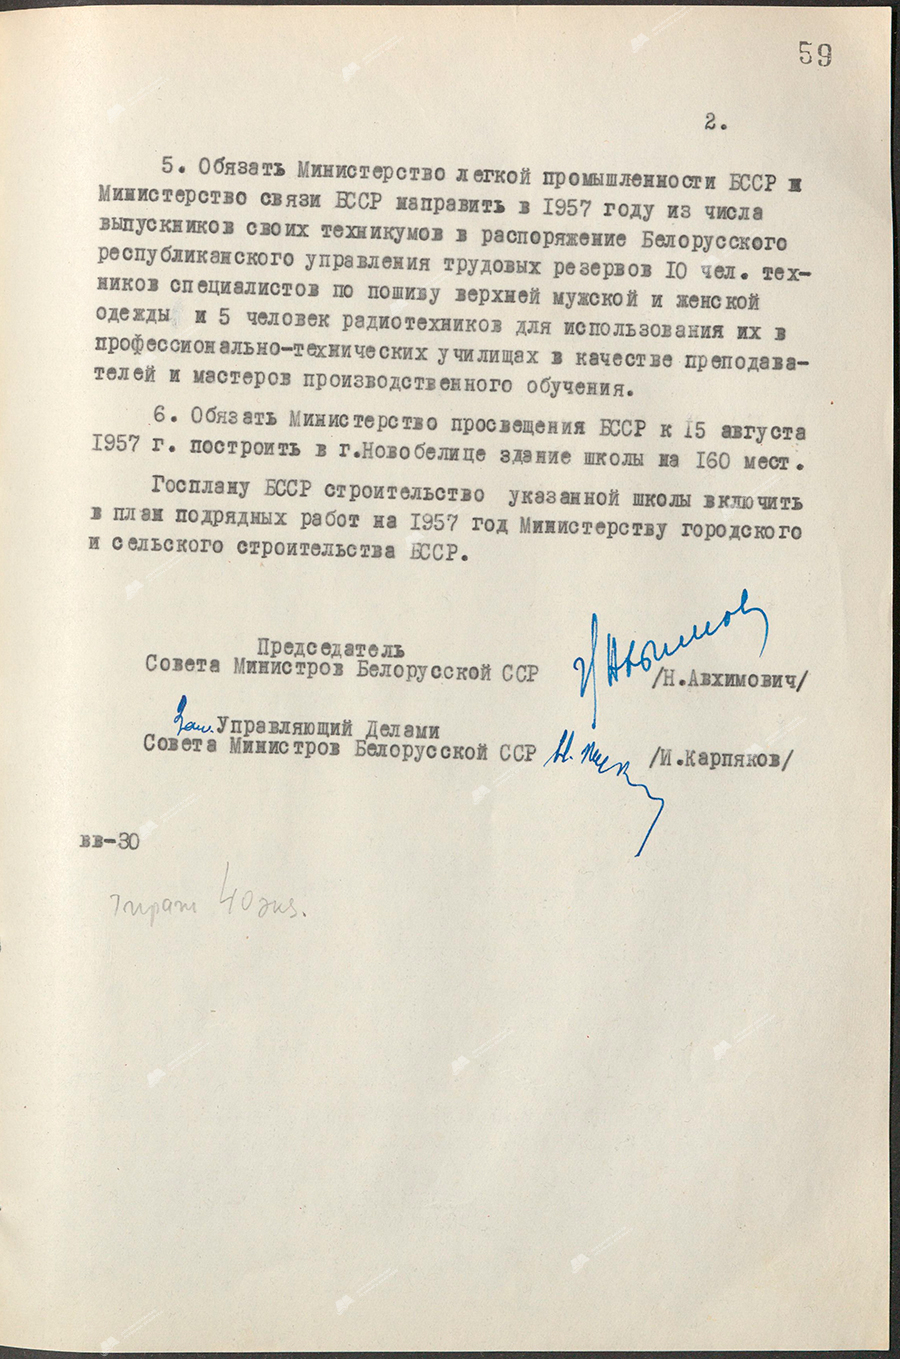 Resolution No. 62 of the Council of Ministers of the BSSR «On the organization of vocational schools»-с. 1